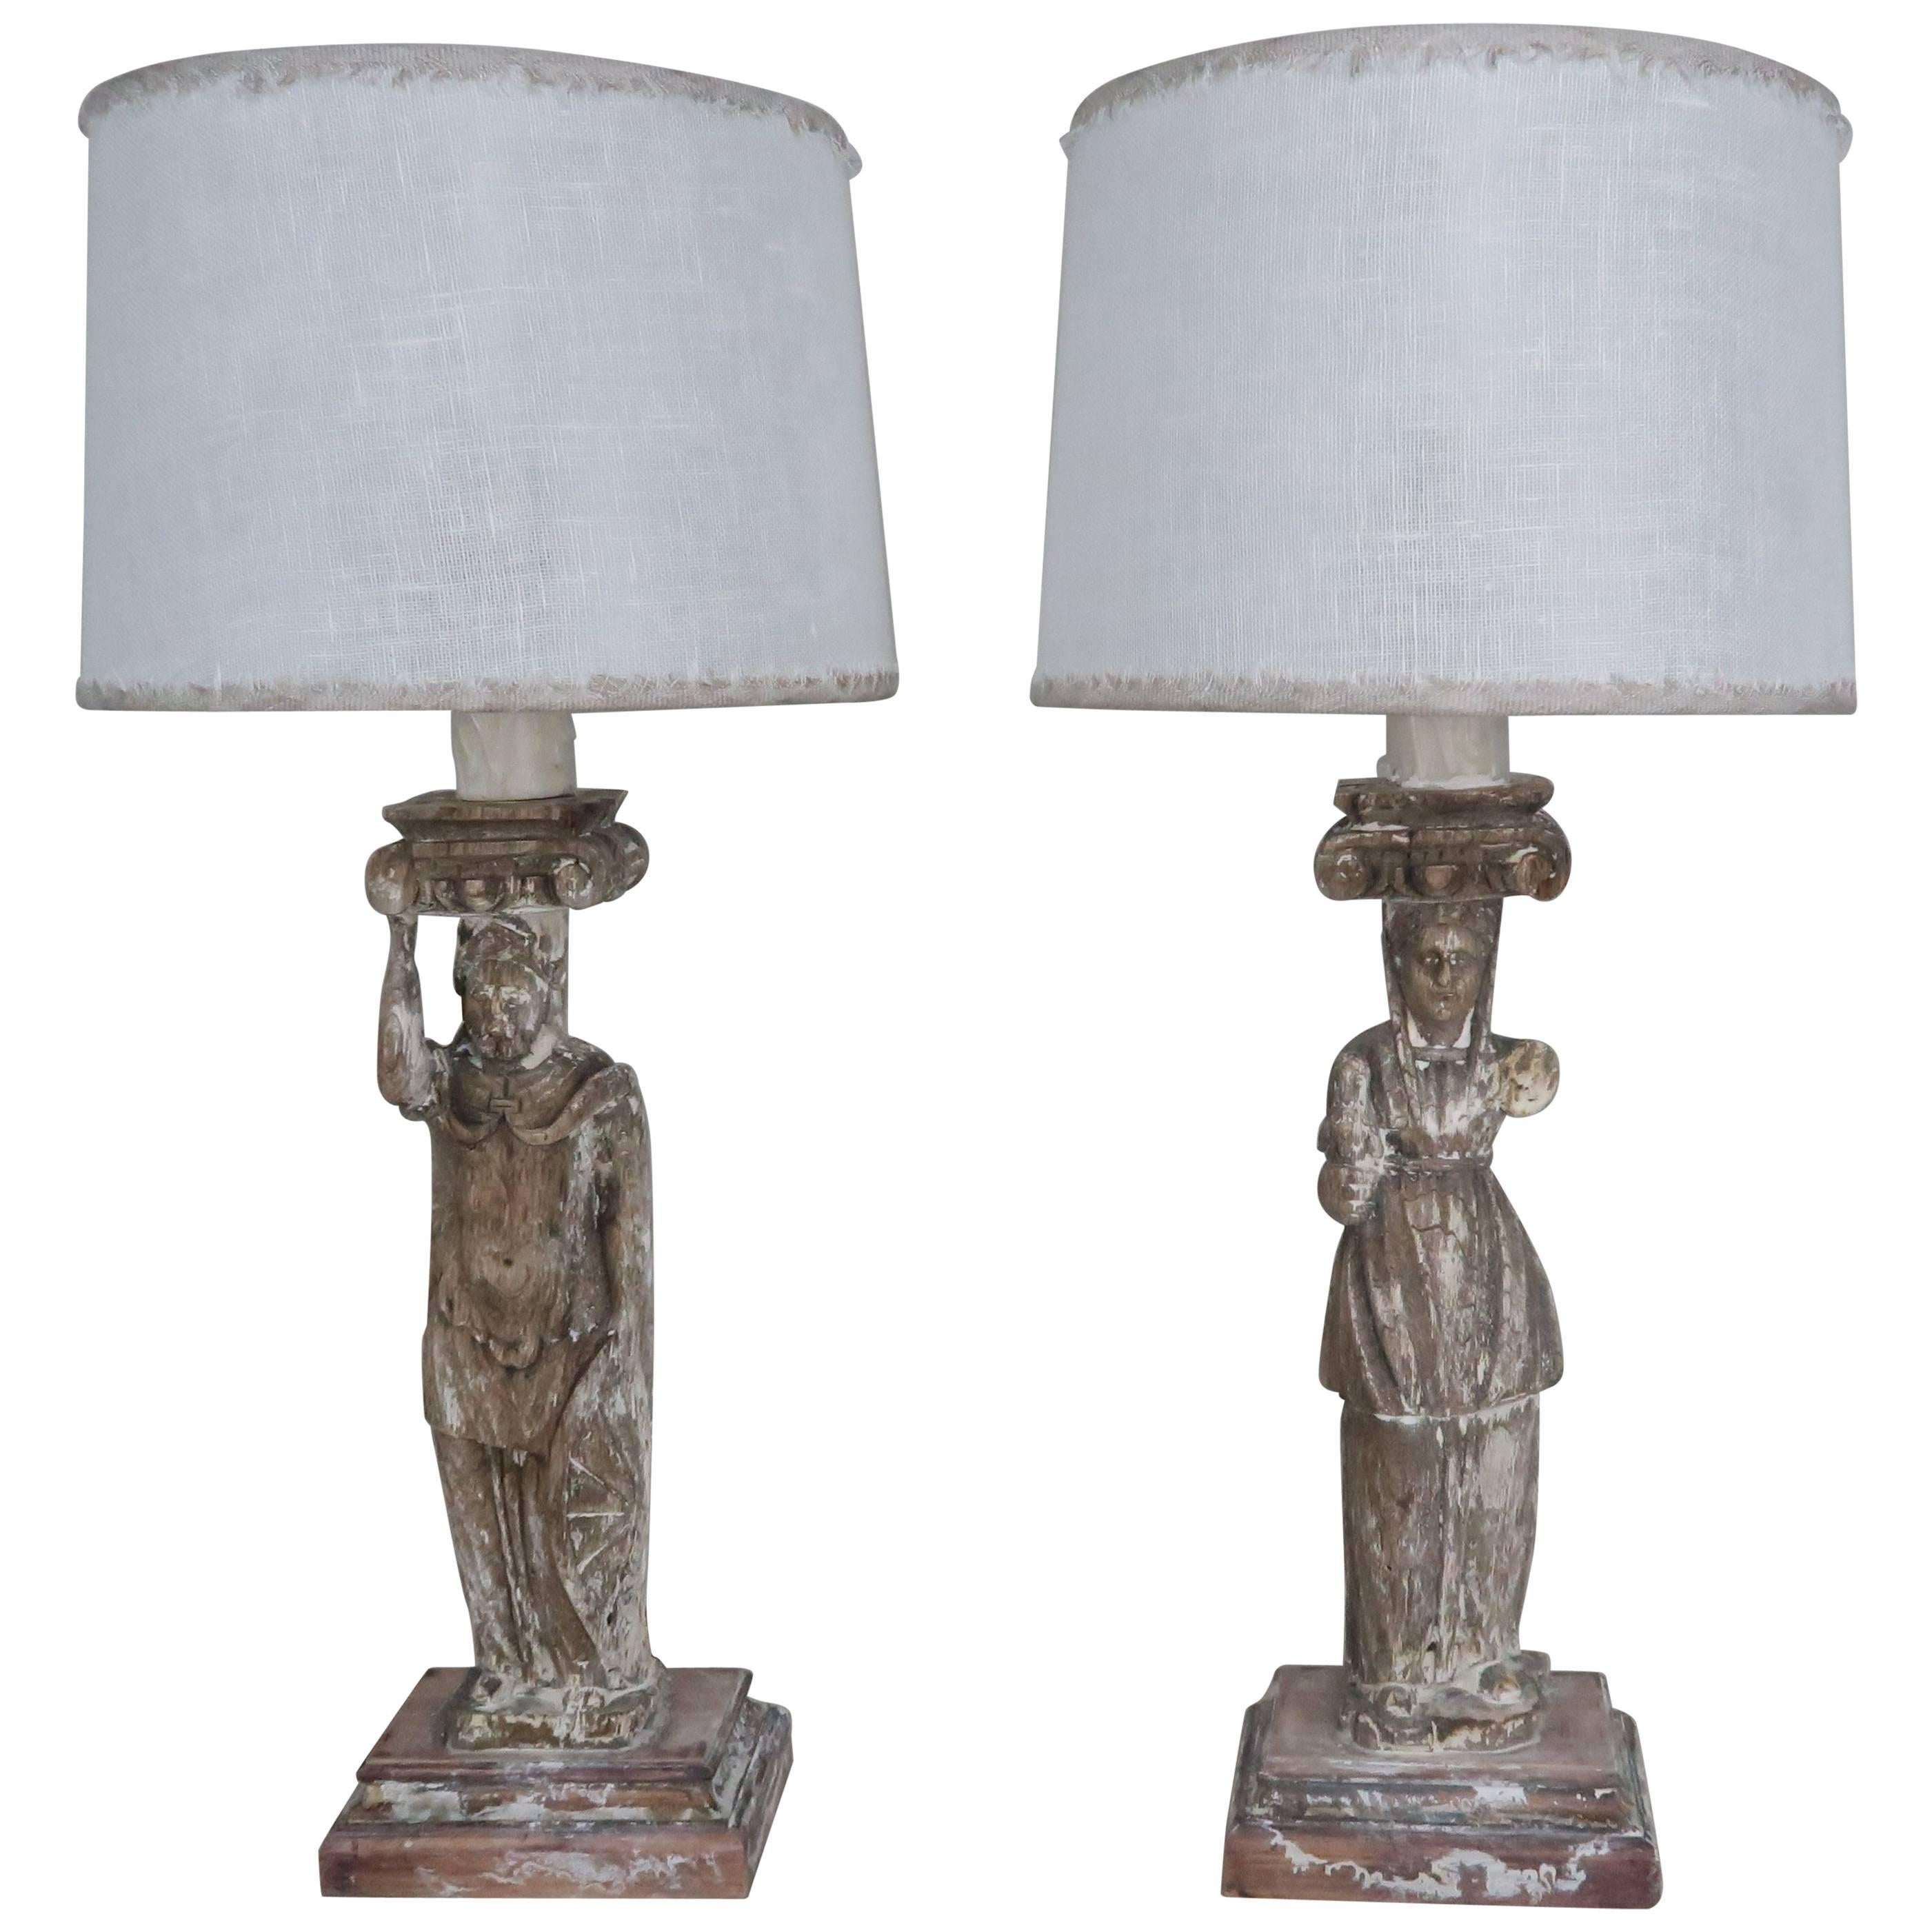 19th Century Neoclassical Figural Painted Lamps with Linen Shades